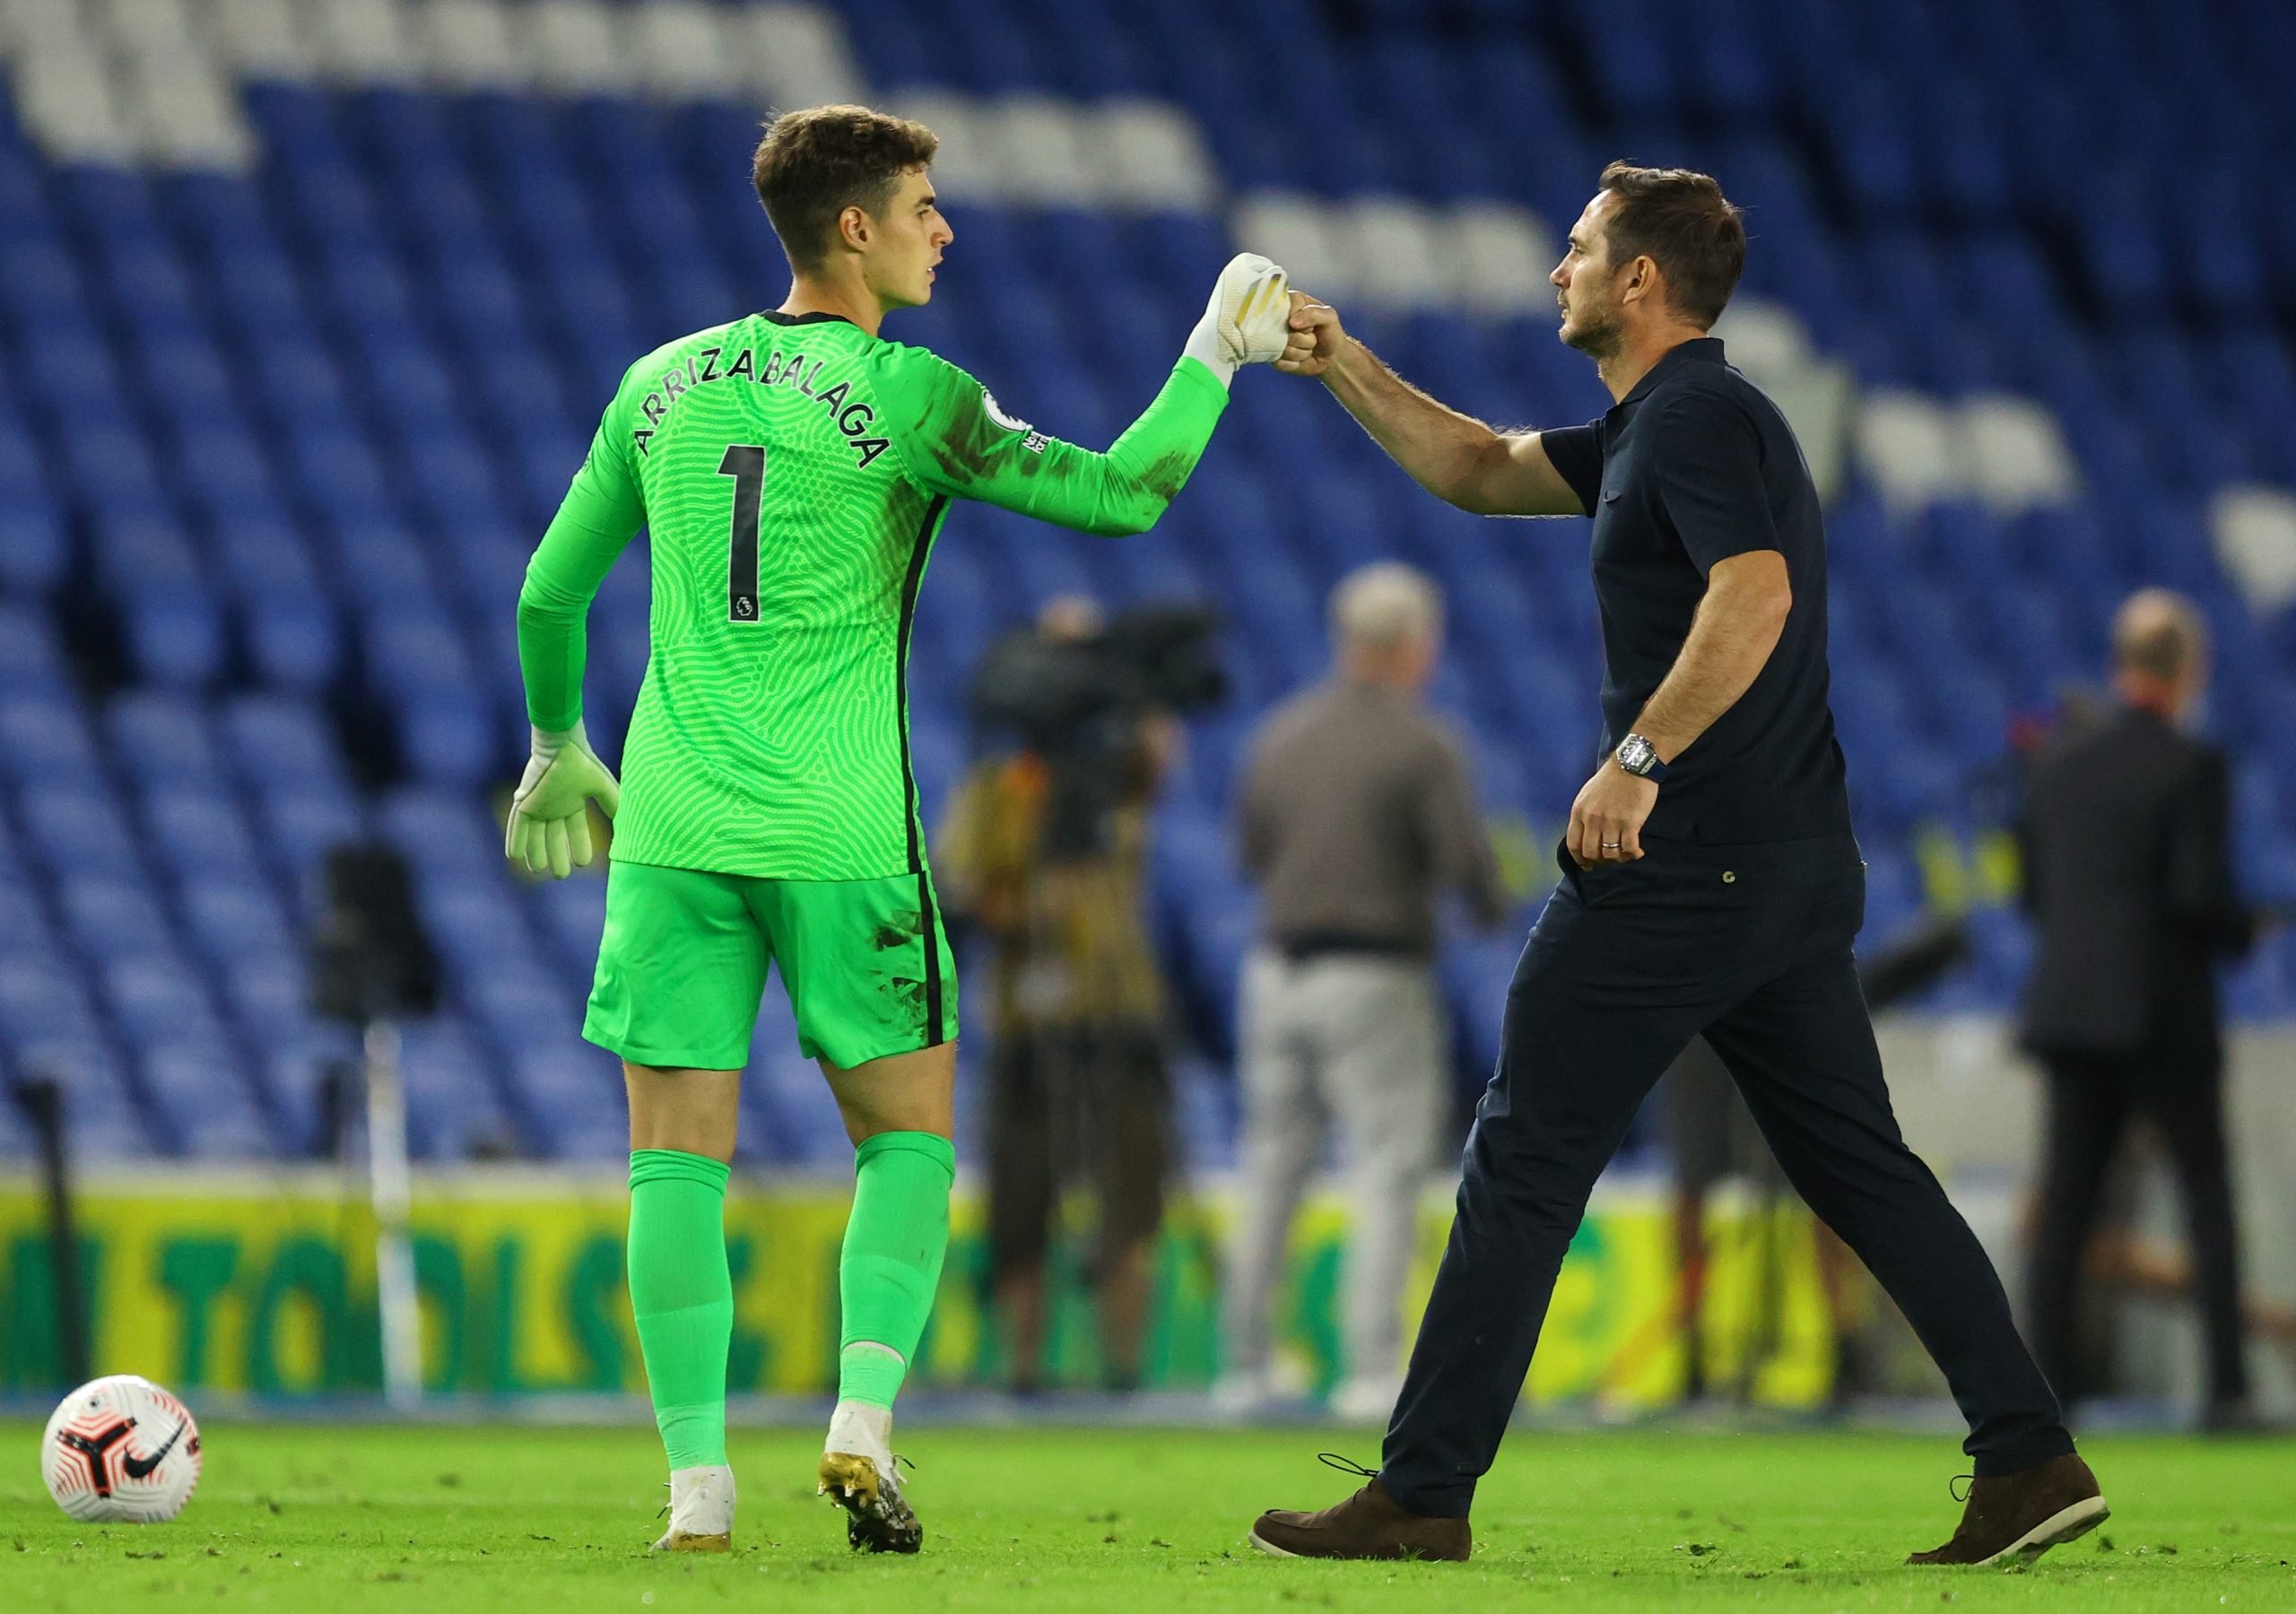 Lampard provides update on Chelsea outcast Arrizabalaga's future (Kepa is seen in the photo)